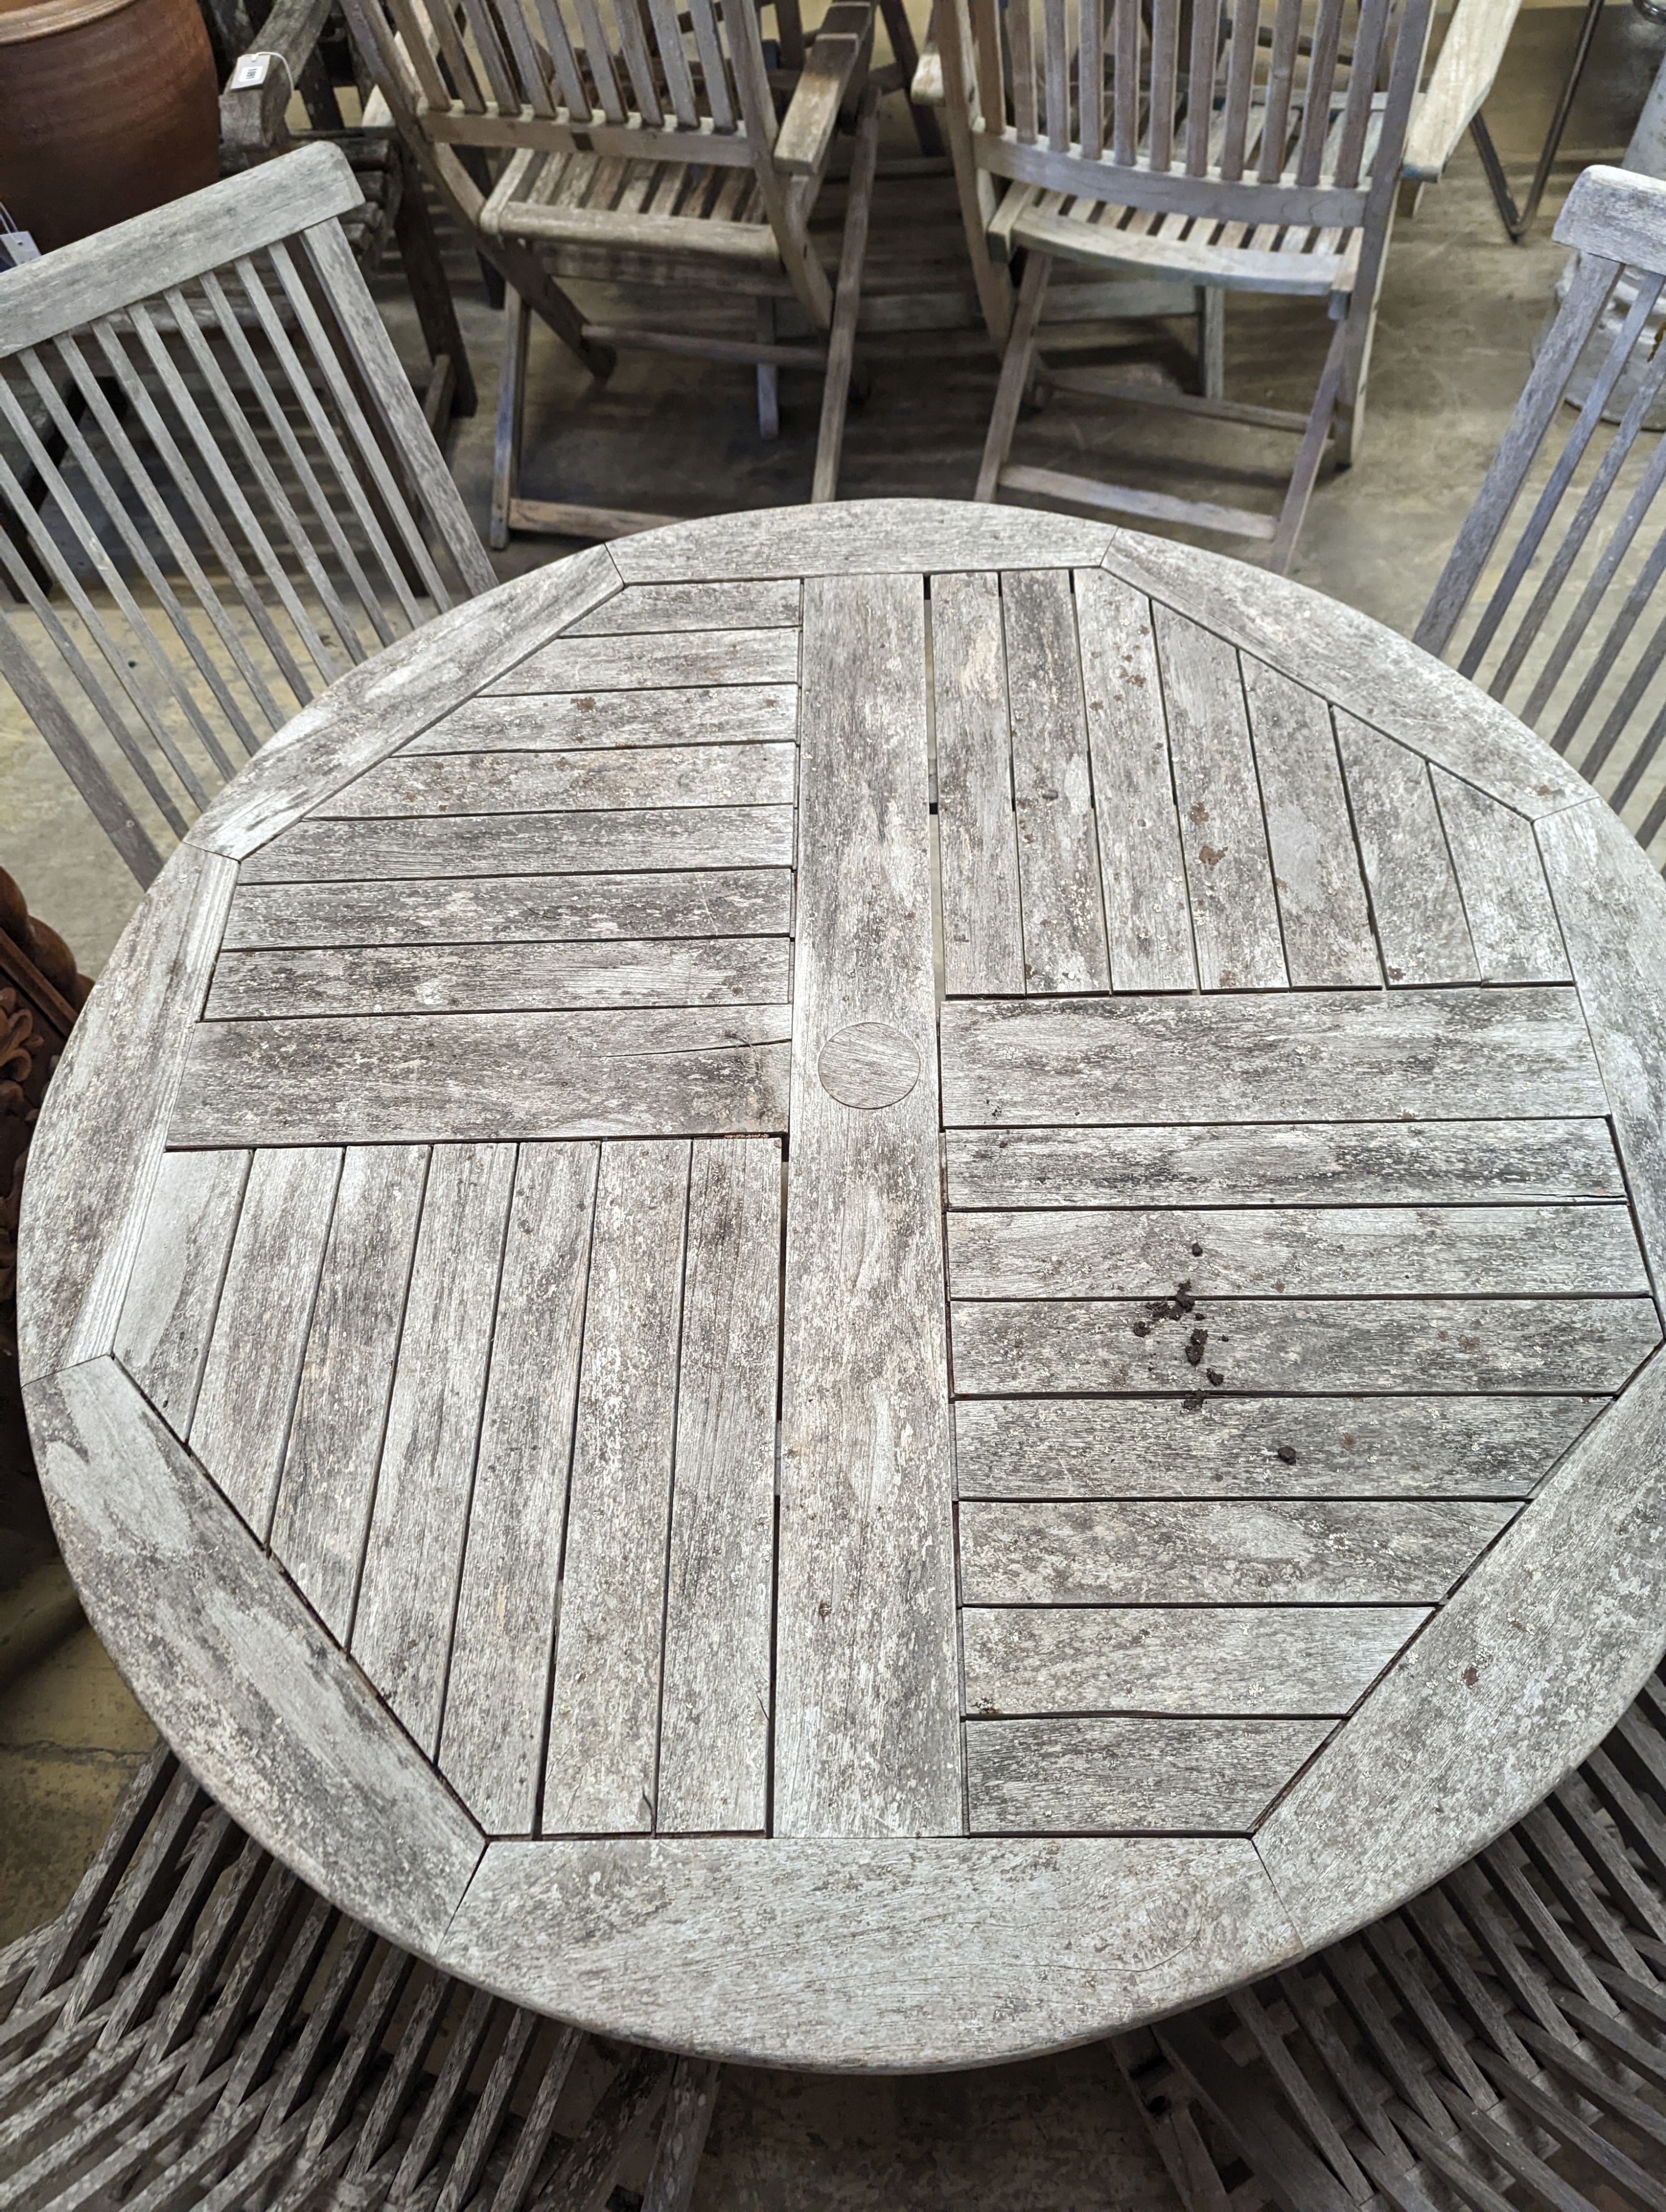 A circular weathered teak garden table, diameter 100cm, height 75cm together with four folding chairs